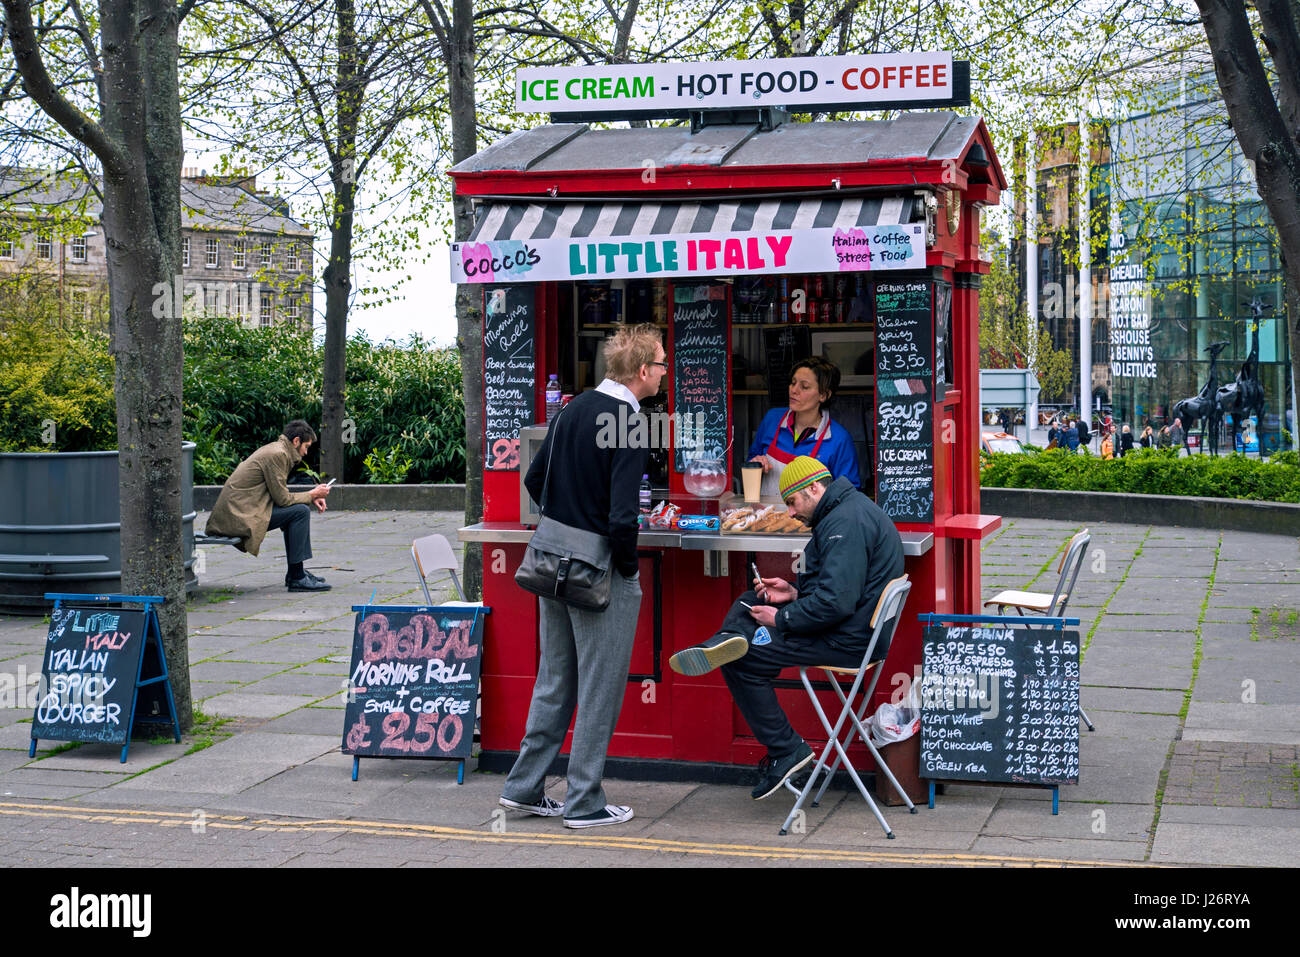 Police box in Edinburgh which has been converted into a stall selling filled rolls and coffee. Stock Photo